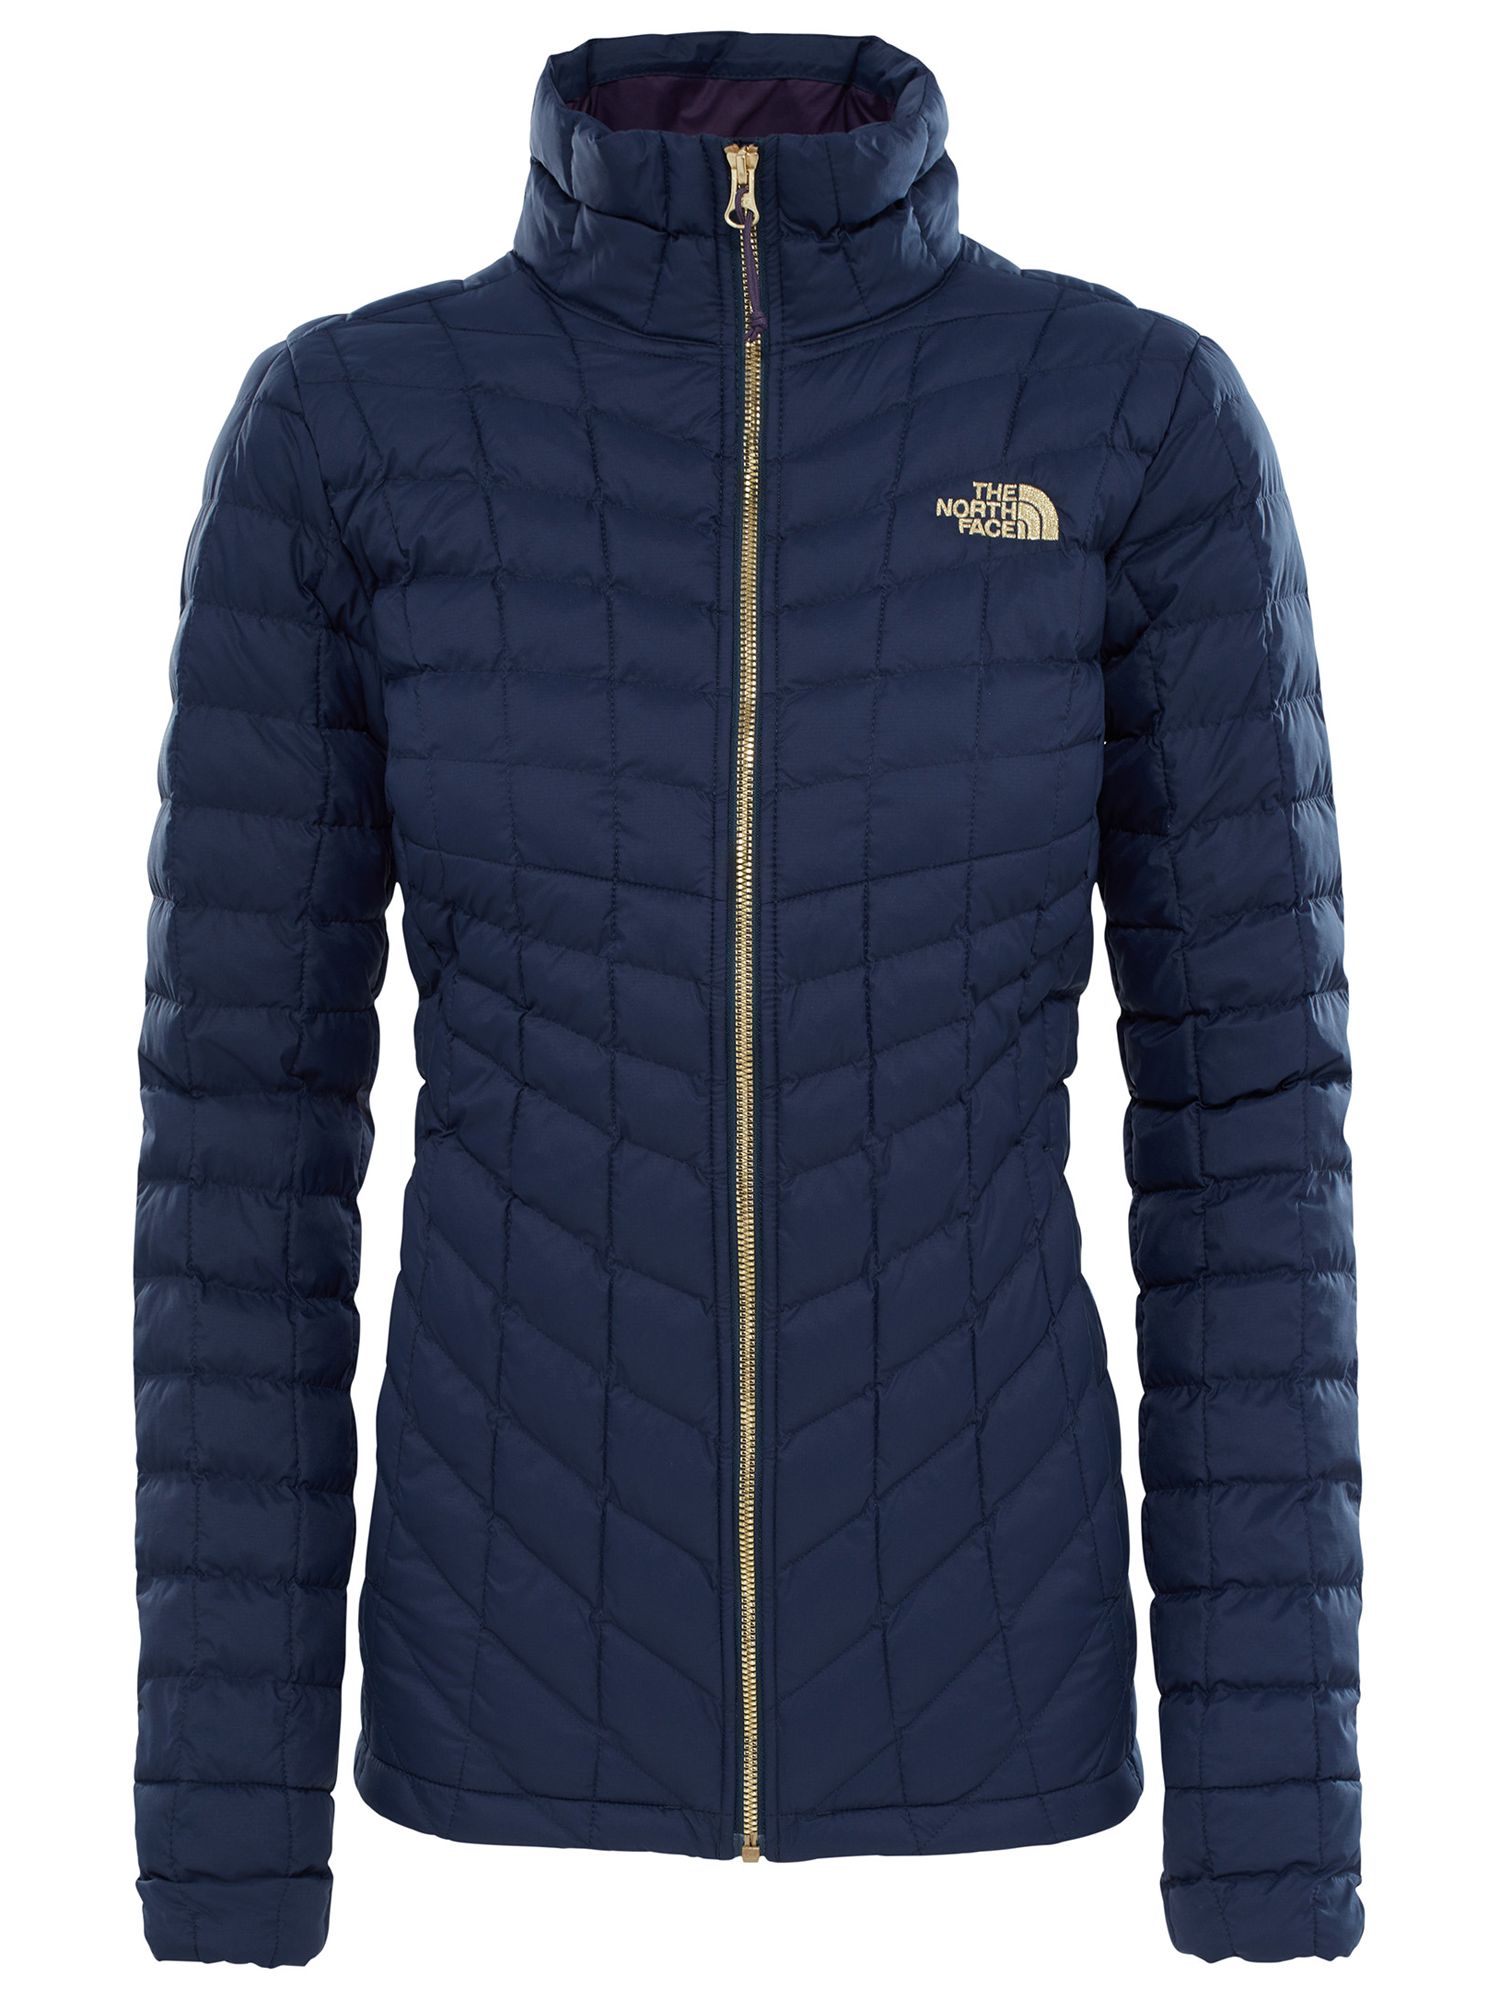 The North Face Thermoball Zip-In Women's Insulated Jacket, Navy Blue